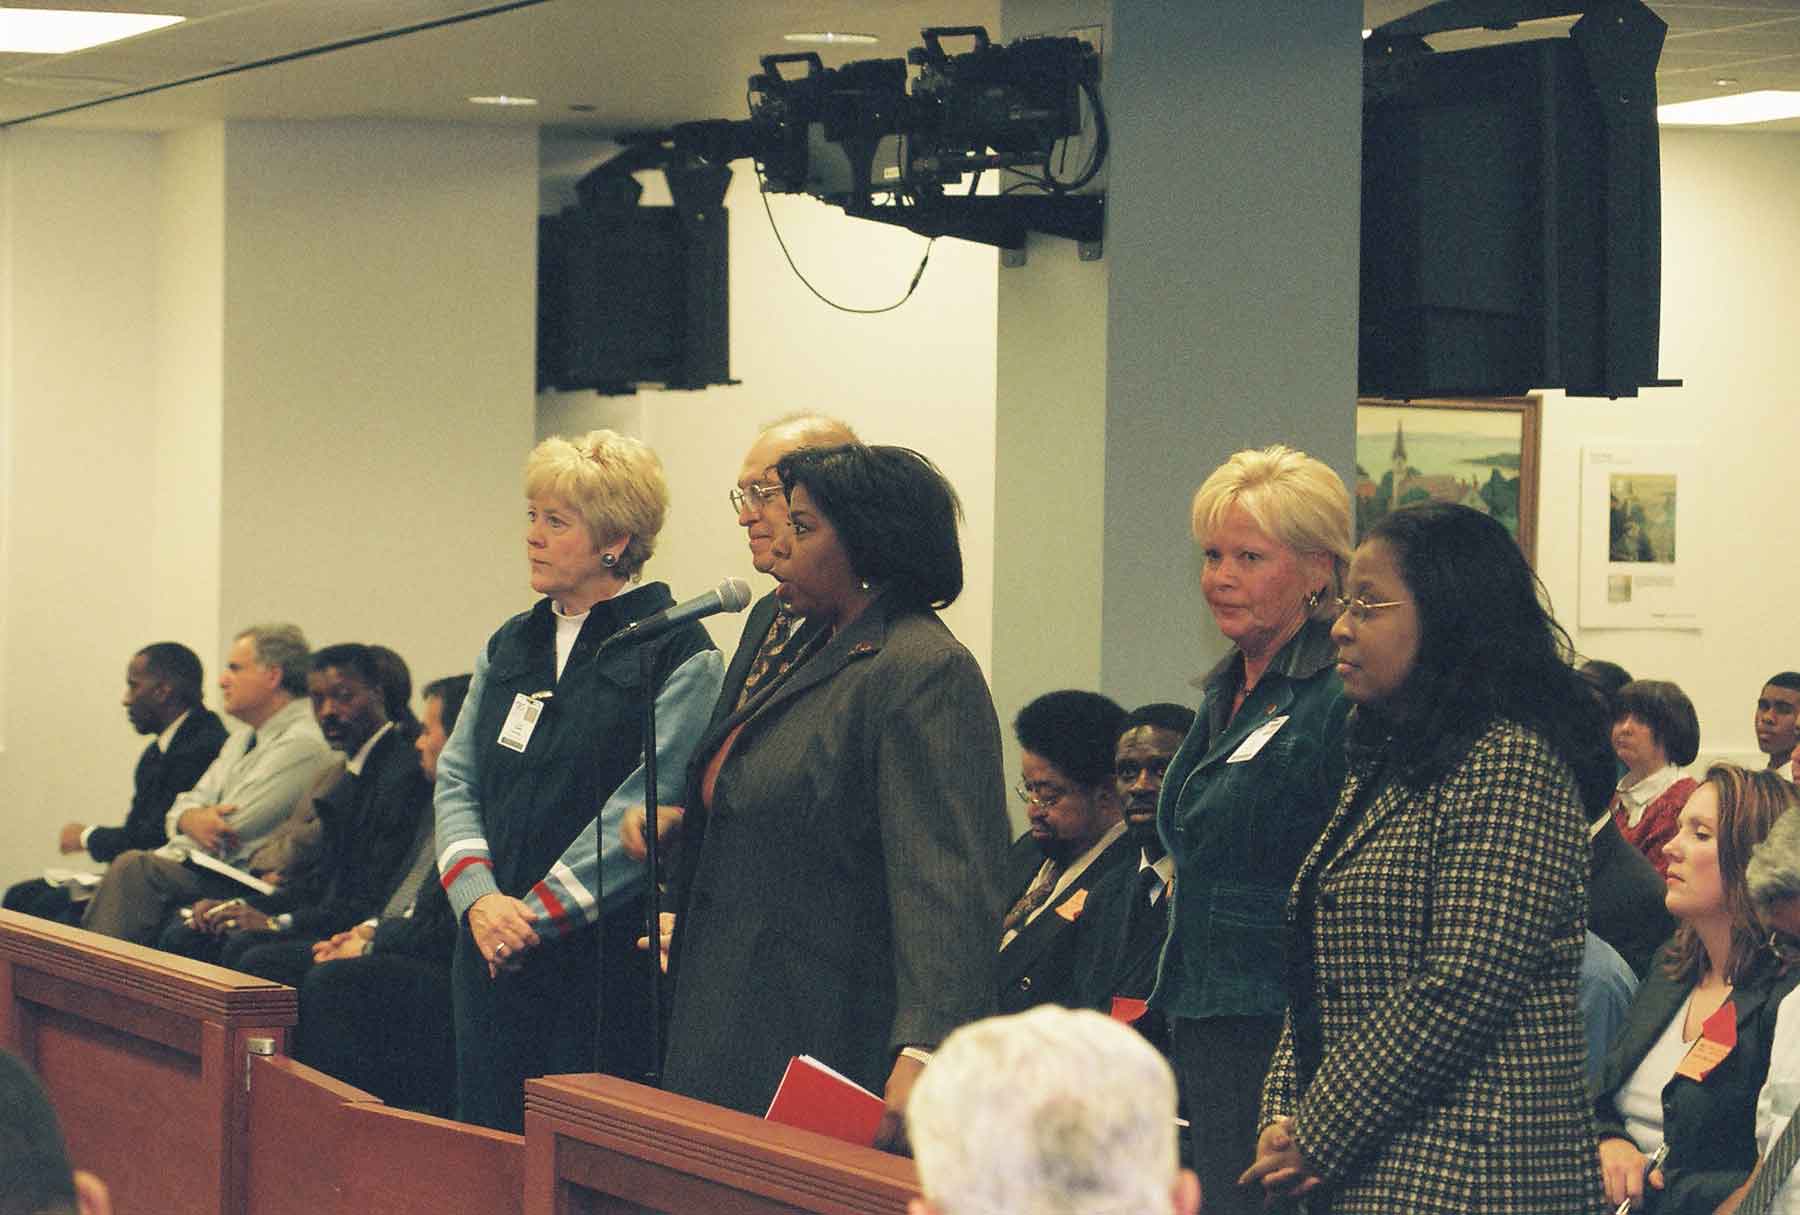 When Chicago Teachers Union President Marilyn Stewart appeared before the Chicago Board of Education at its January 10, 2006 meeting (above) the union’s members did not know that increased pay and benefits for her top staff were slowly bankrupting the 31,000-member union. Surrounding Marilyn above are (left to right): Coleen Dykas; Peter Ardito; Sandy Schultz; and Traci Cobb Evans. By the time this photograph was taken, coordinators such as those above were being paid for a ‘53-week year’ and had unprecedented fringe benefits. Two years later, many of the deals are still secret. Substance photo by George N. Schmidt. 